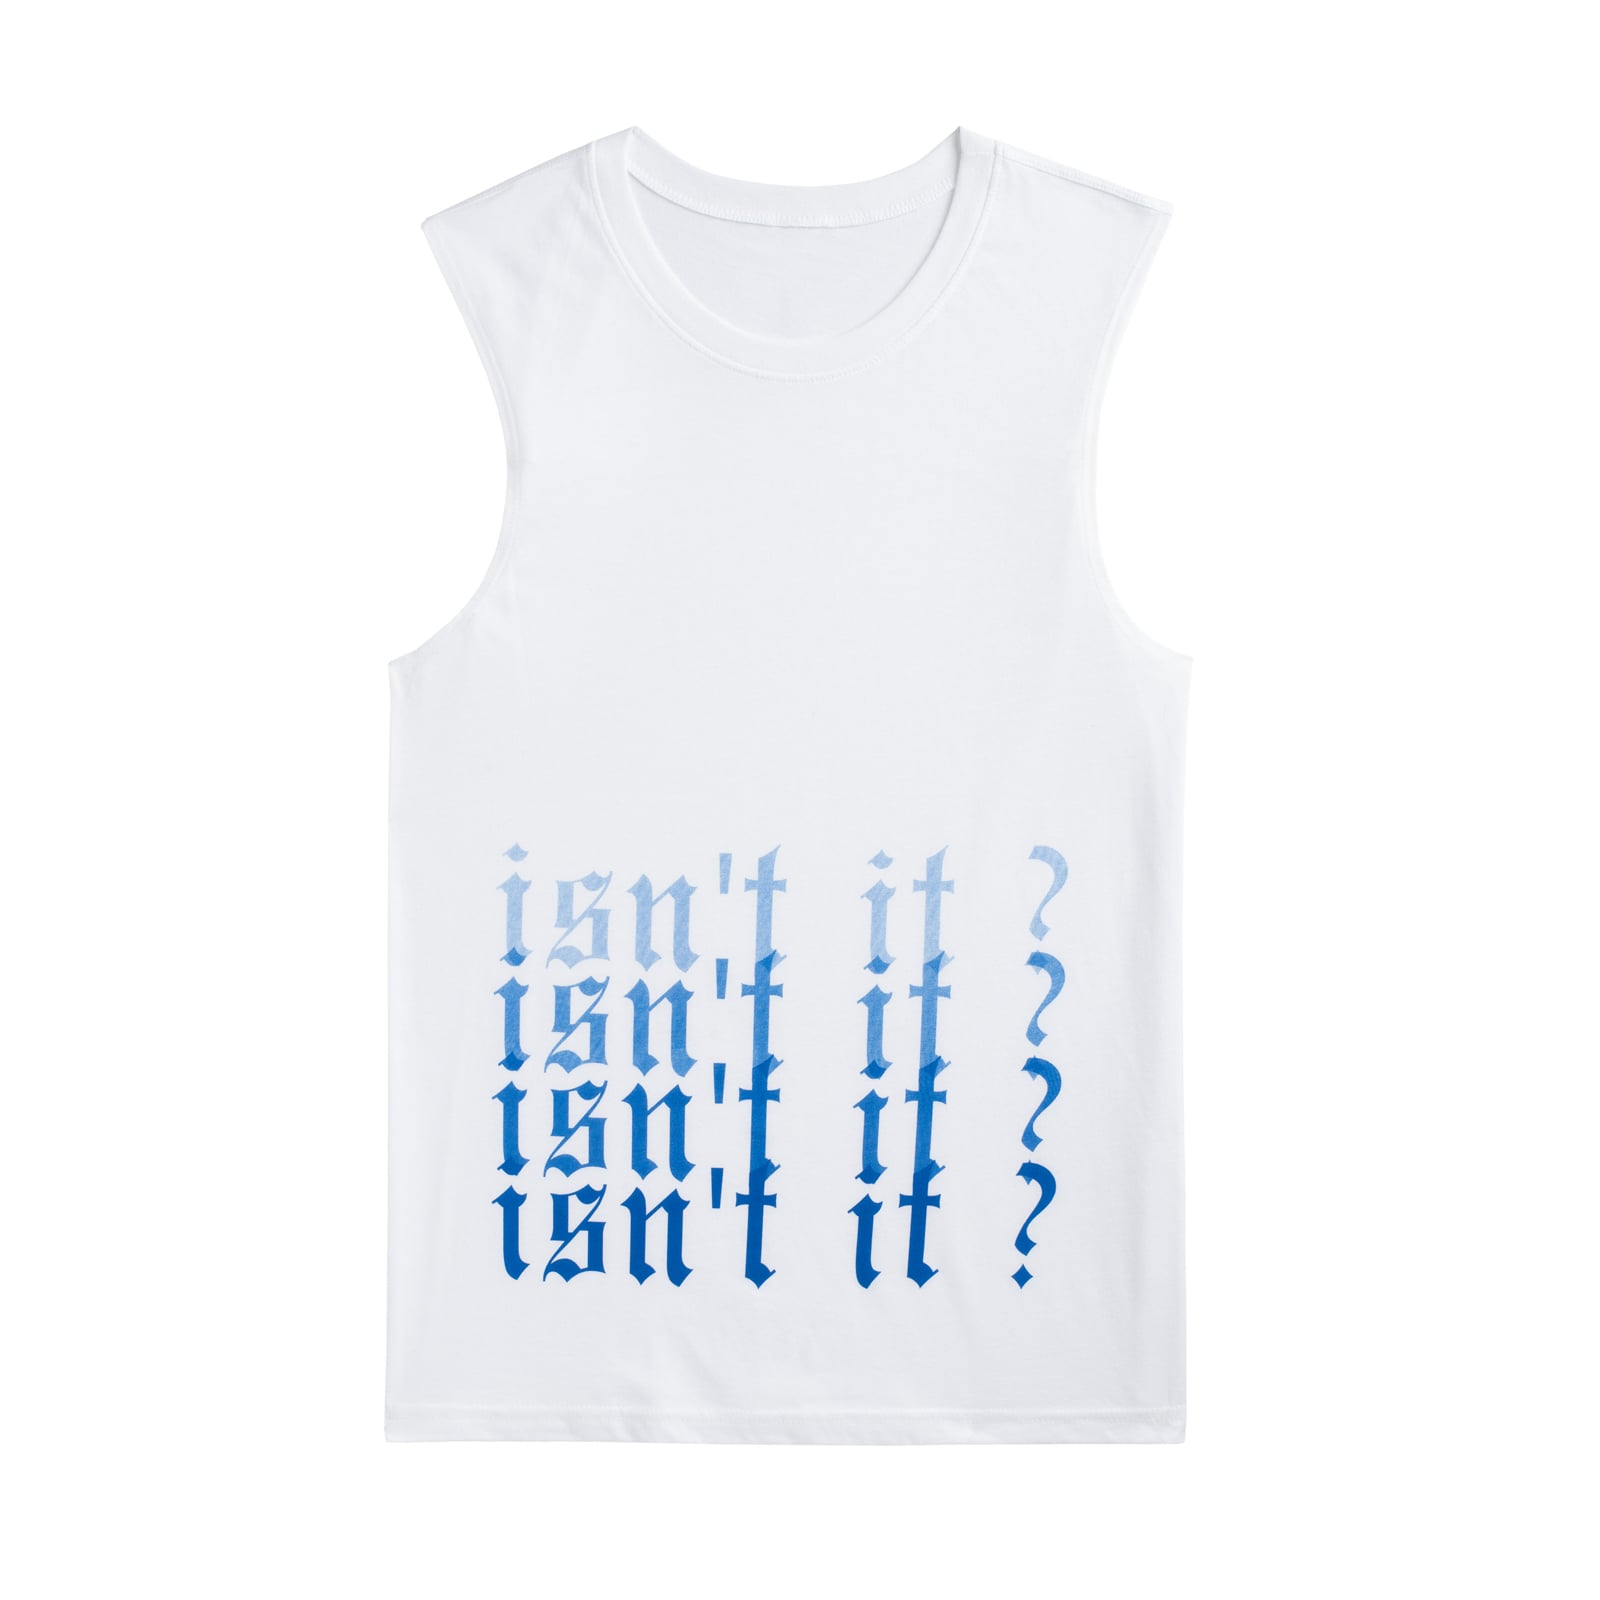 White Muscle Tee With Delicate Lyrics 75 Taylor Swift